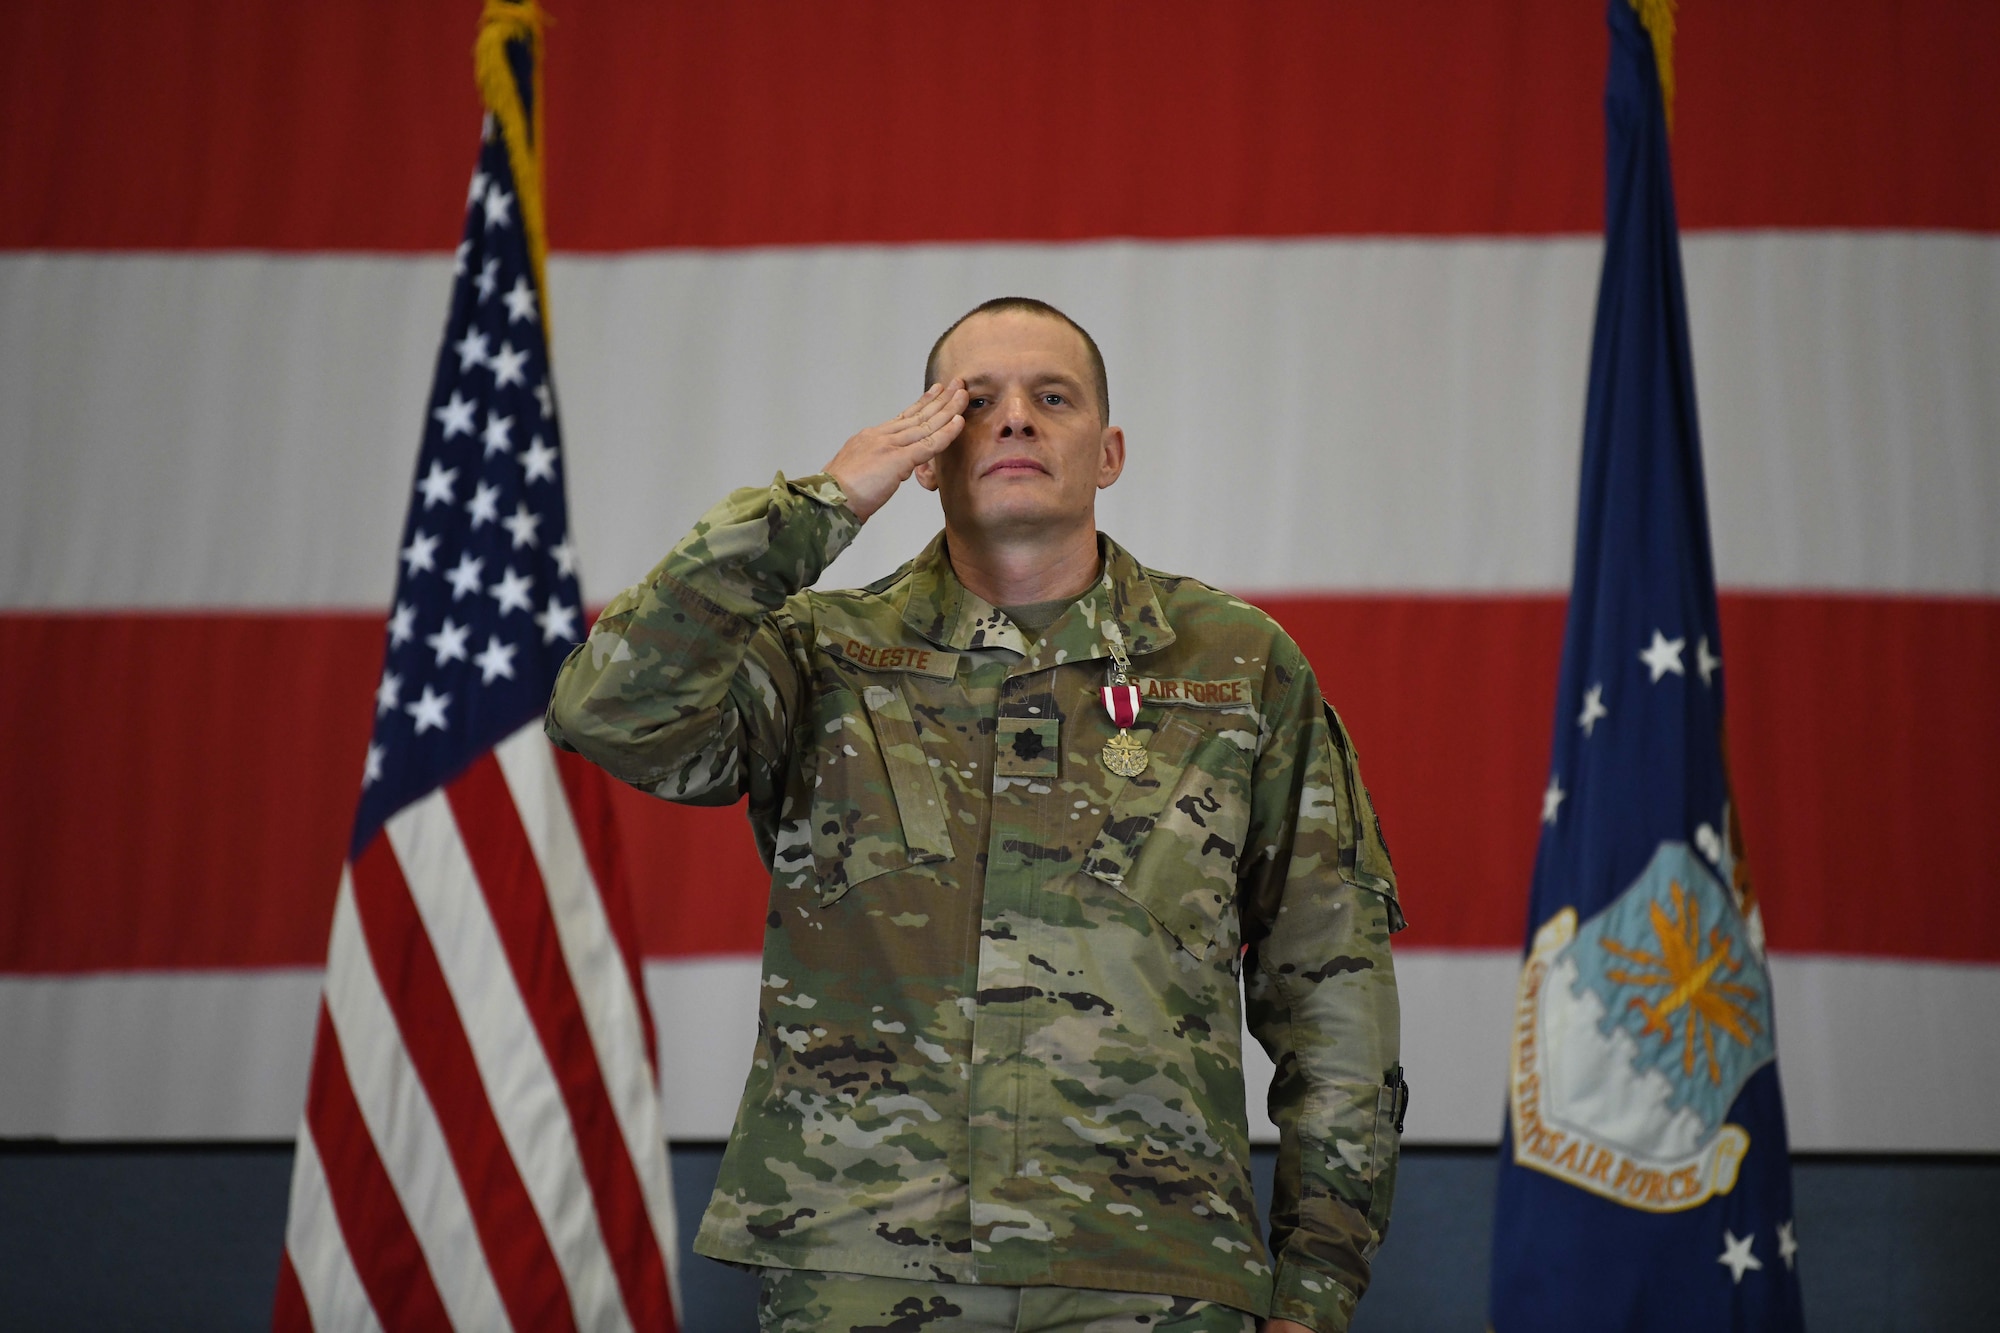 Lt. Col David Celeste, outgoing commander of the 90th Missile Security Forces Squadron, renders his final salute to his troops during the 90 MSFS change of command ceremony in the Peacekeeper High Bay on F.E. Warren Air Force Base, Wyoming, July 13, 2021. The ceremony is to signify the transition of authority from Celeste to Lt. Col. William Brokaw, incoming commander of the 90th Missile Security Forces Squadron. (U.S. Air Force photo by Airman 1st Class Darius Frazier)